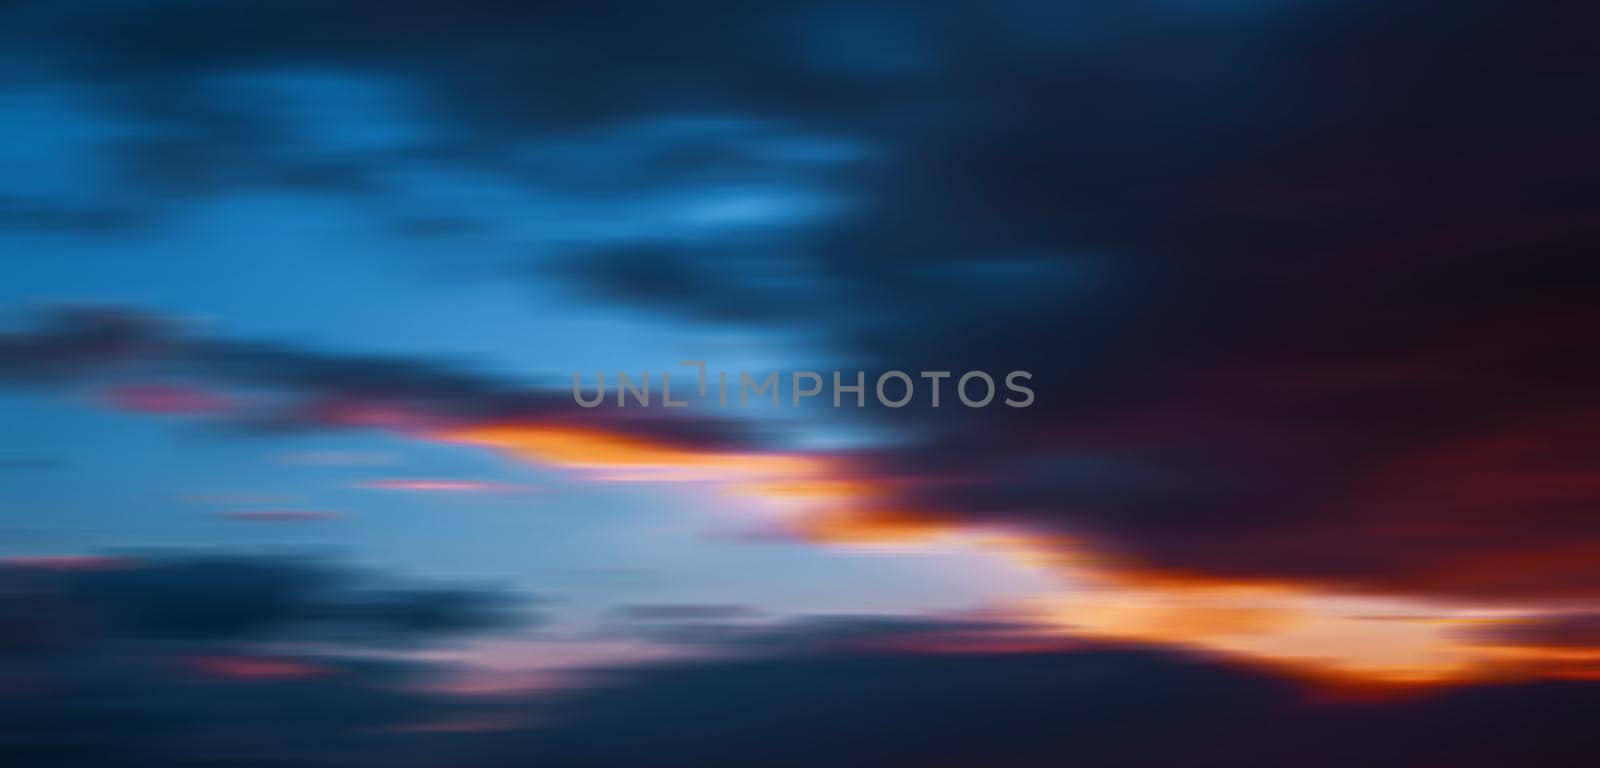 Abstract blurred nature background. Sky with dramatic clouds